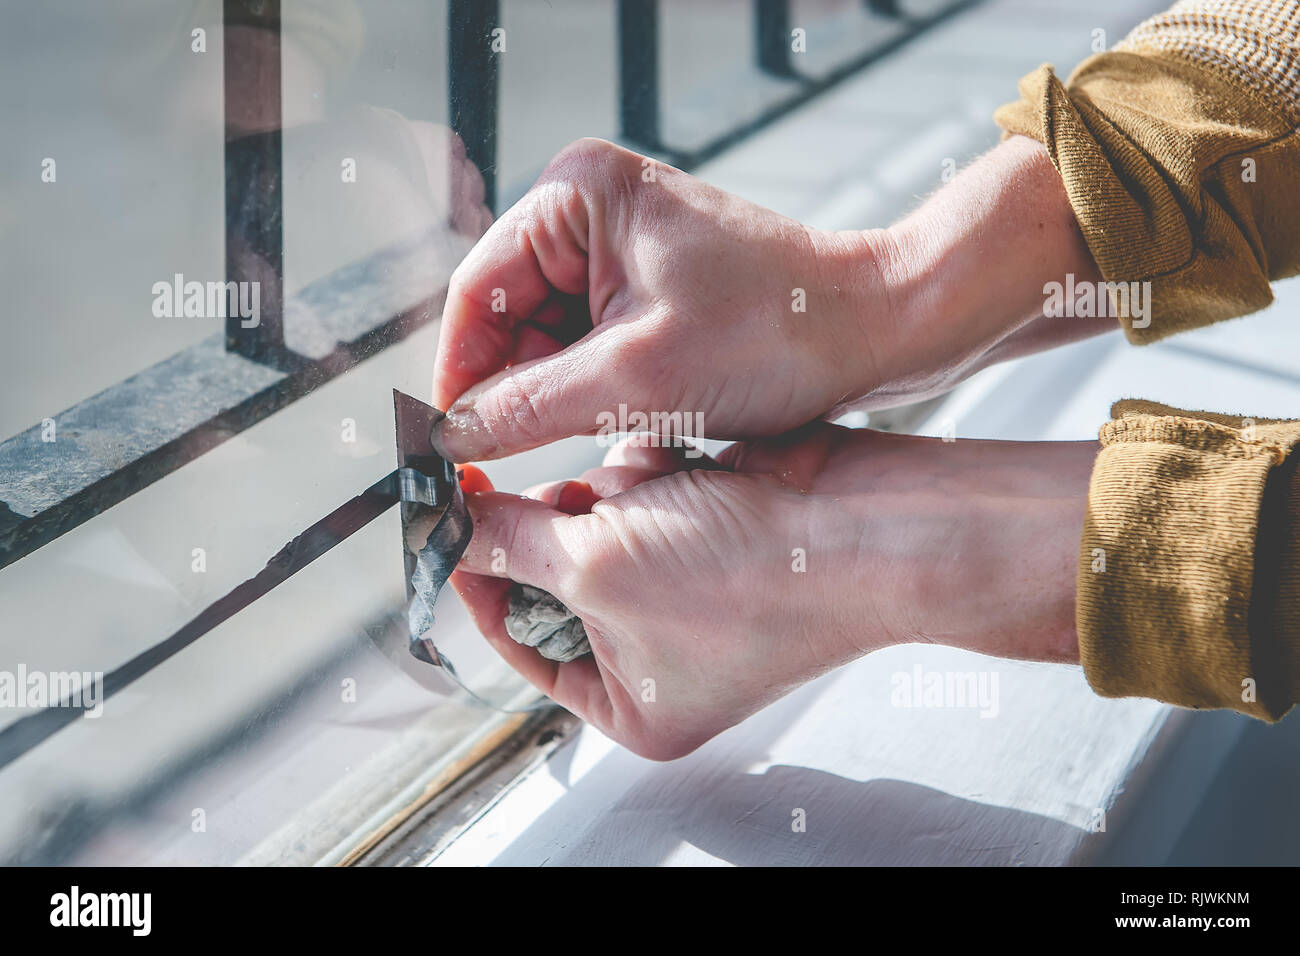 Hands of a woman using a razor blade to remove a decal from a store front window. Stock Photo